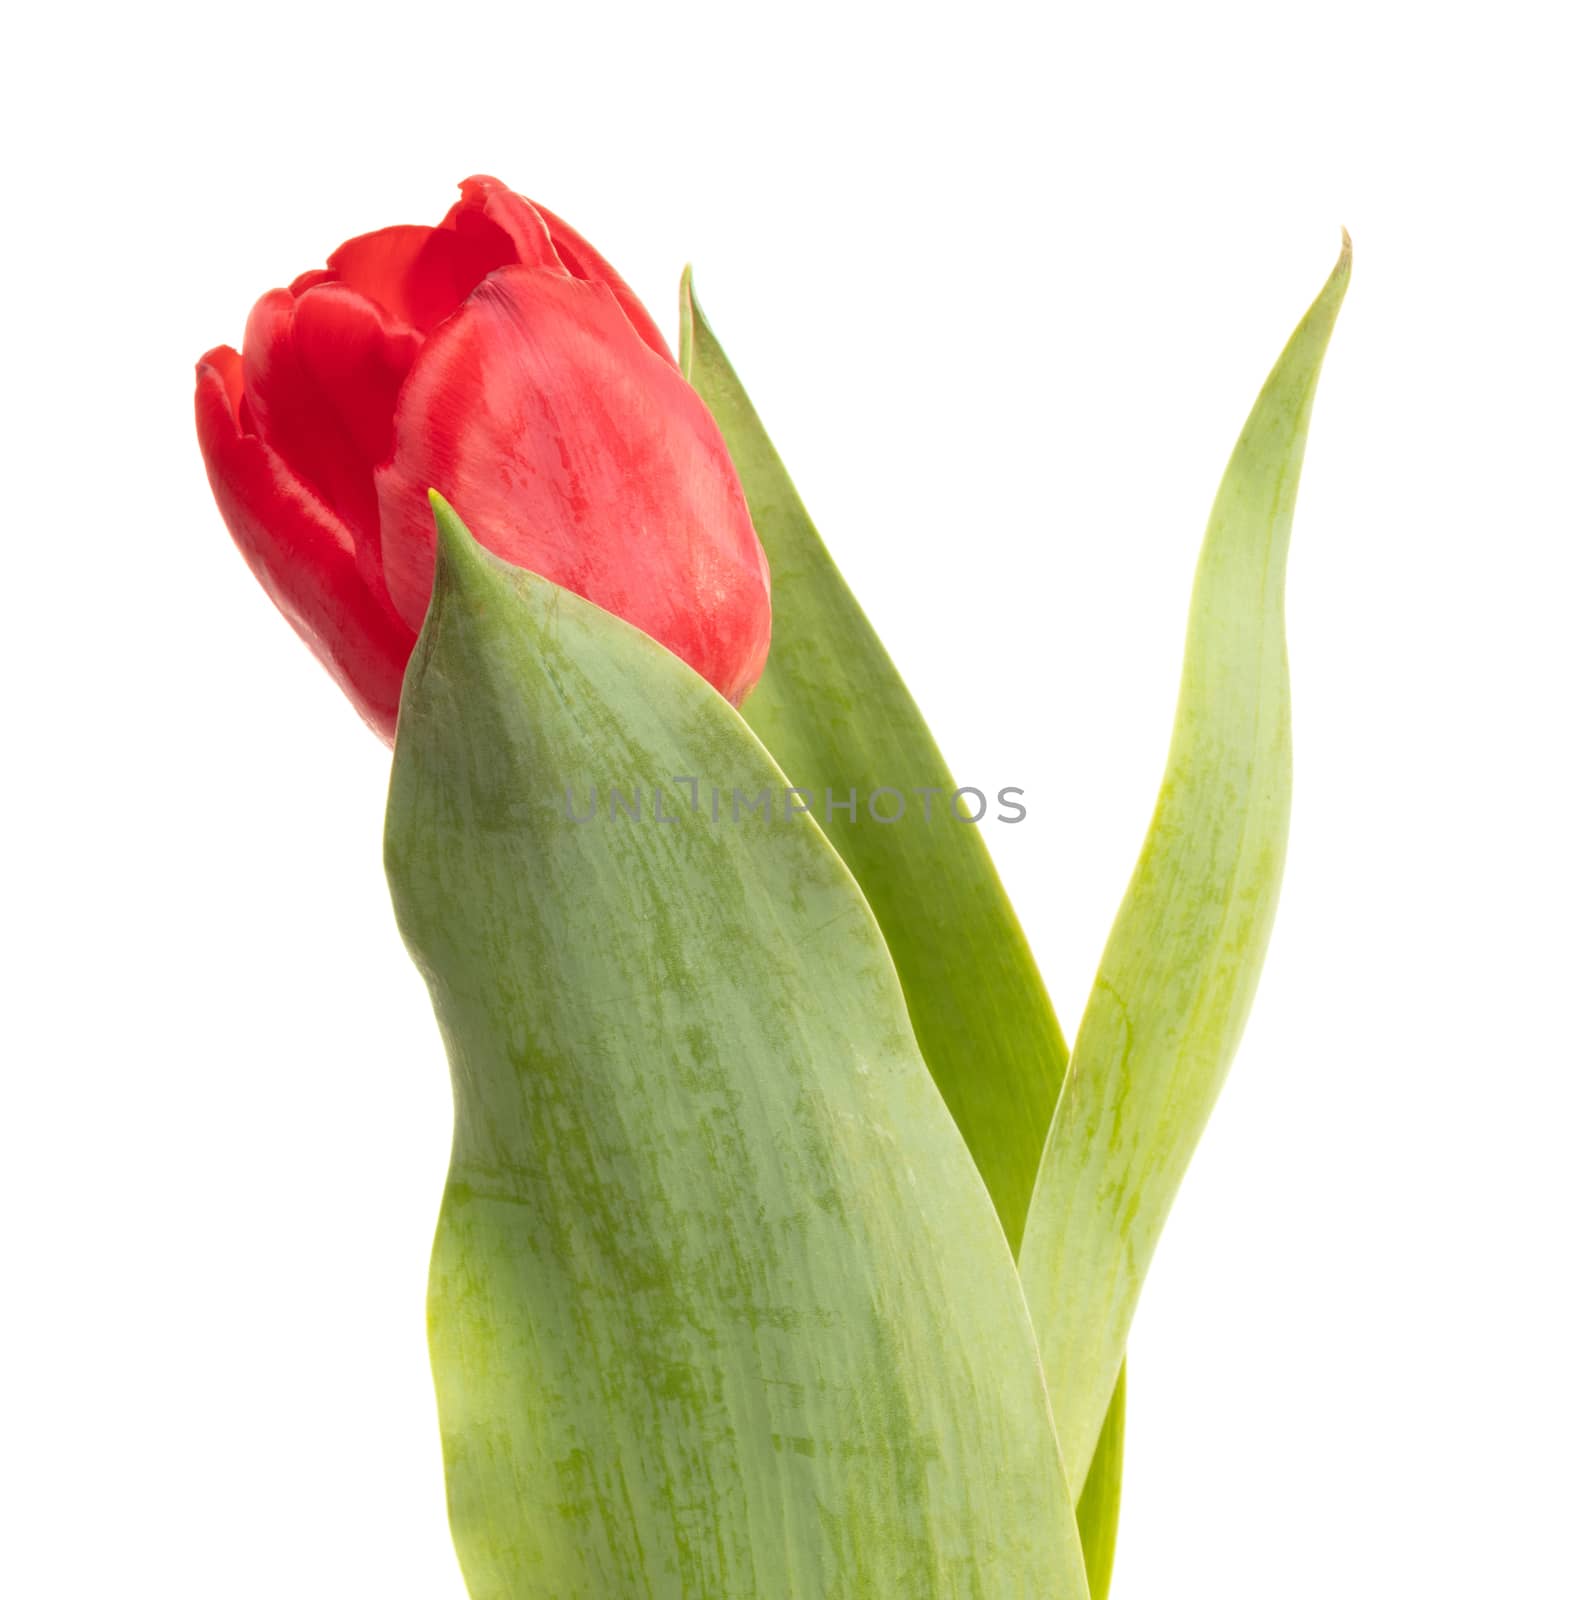 Red tulip isolated on a white background